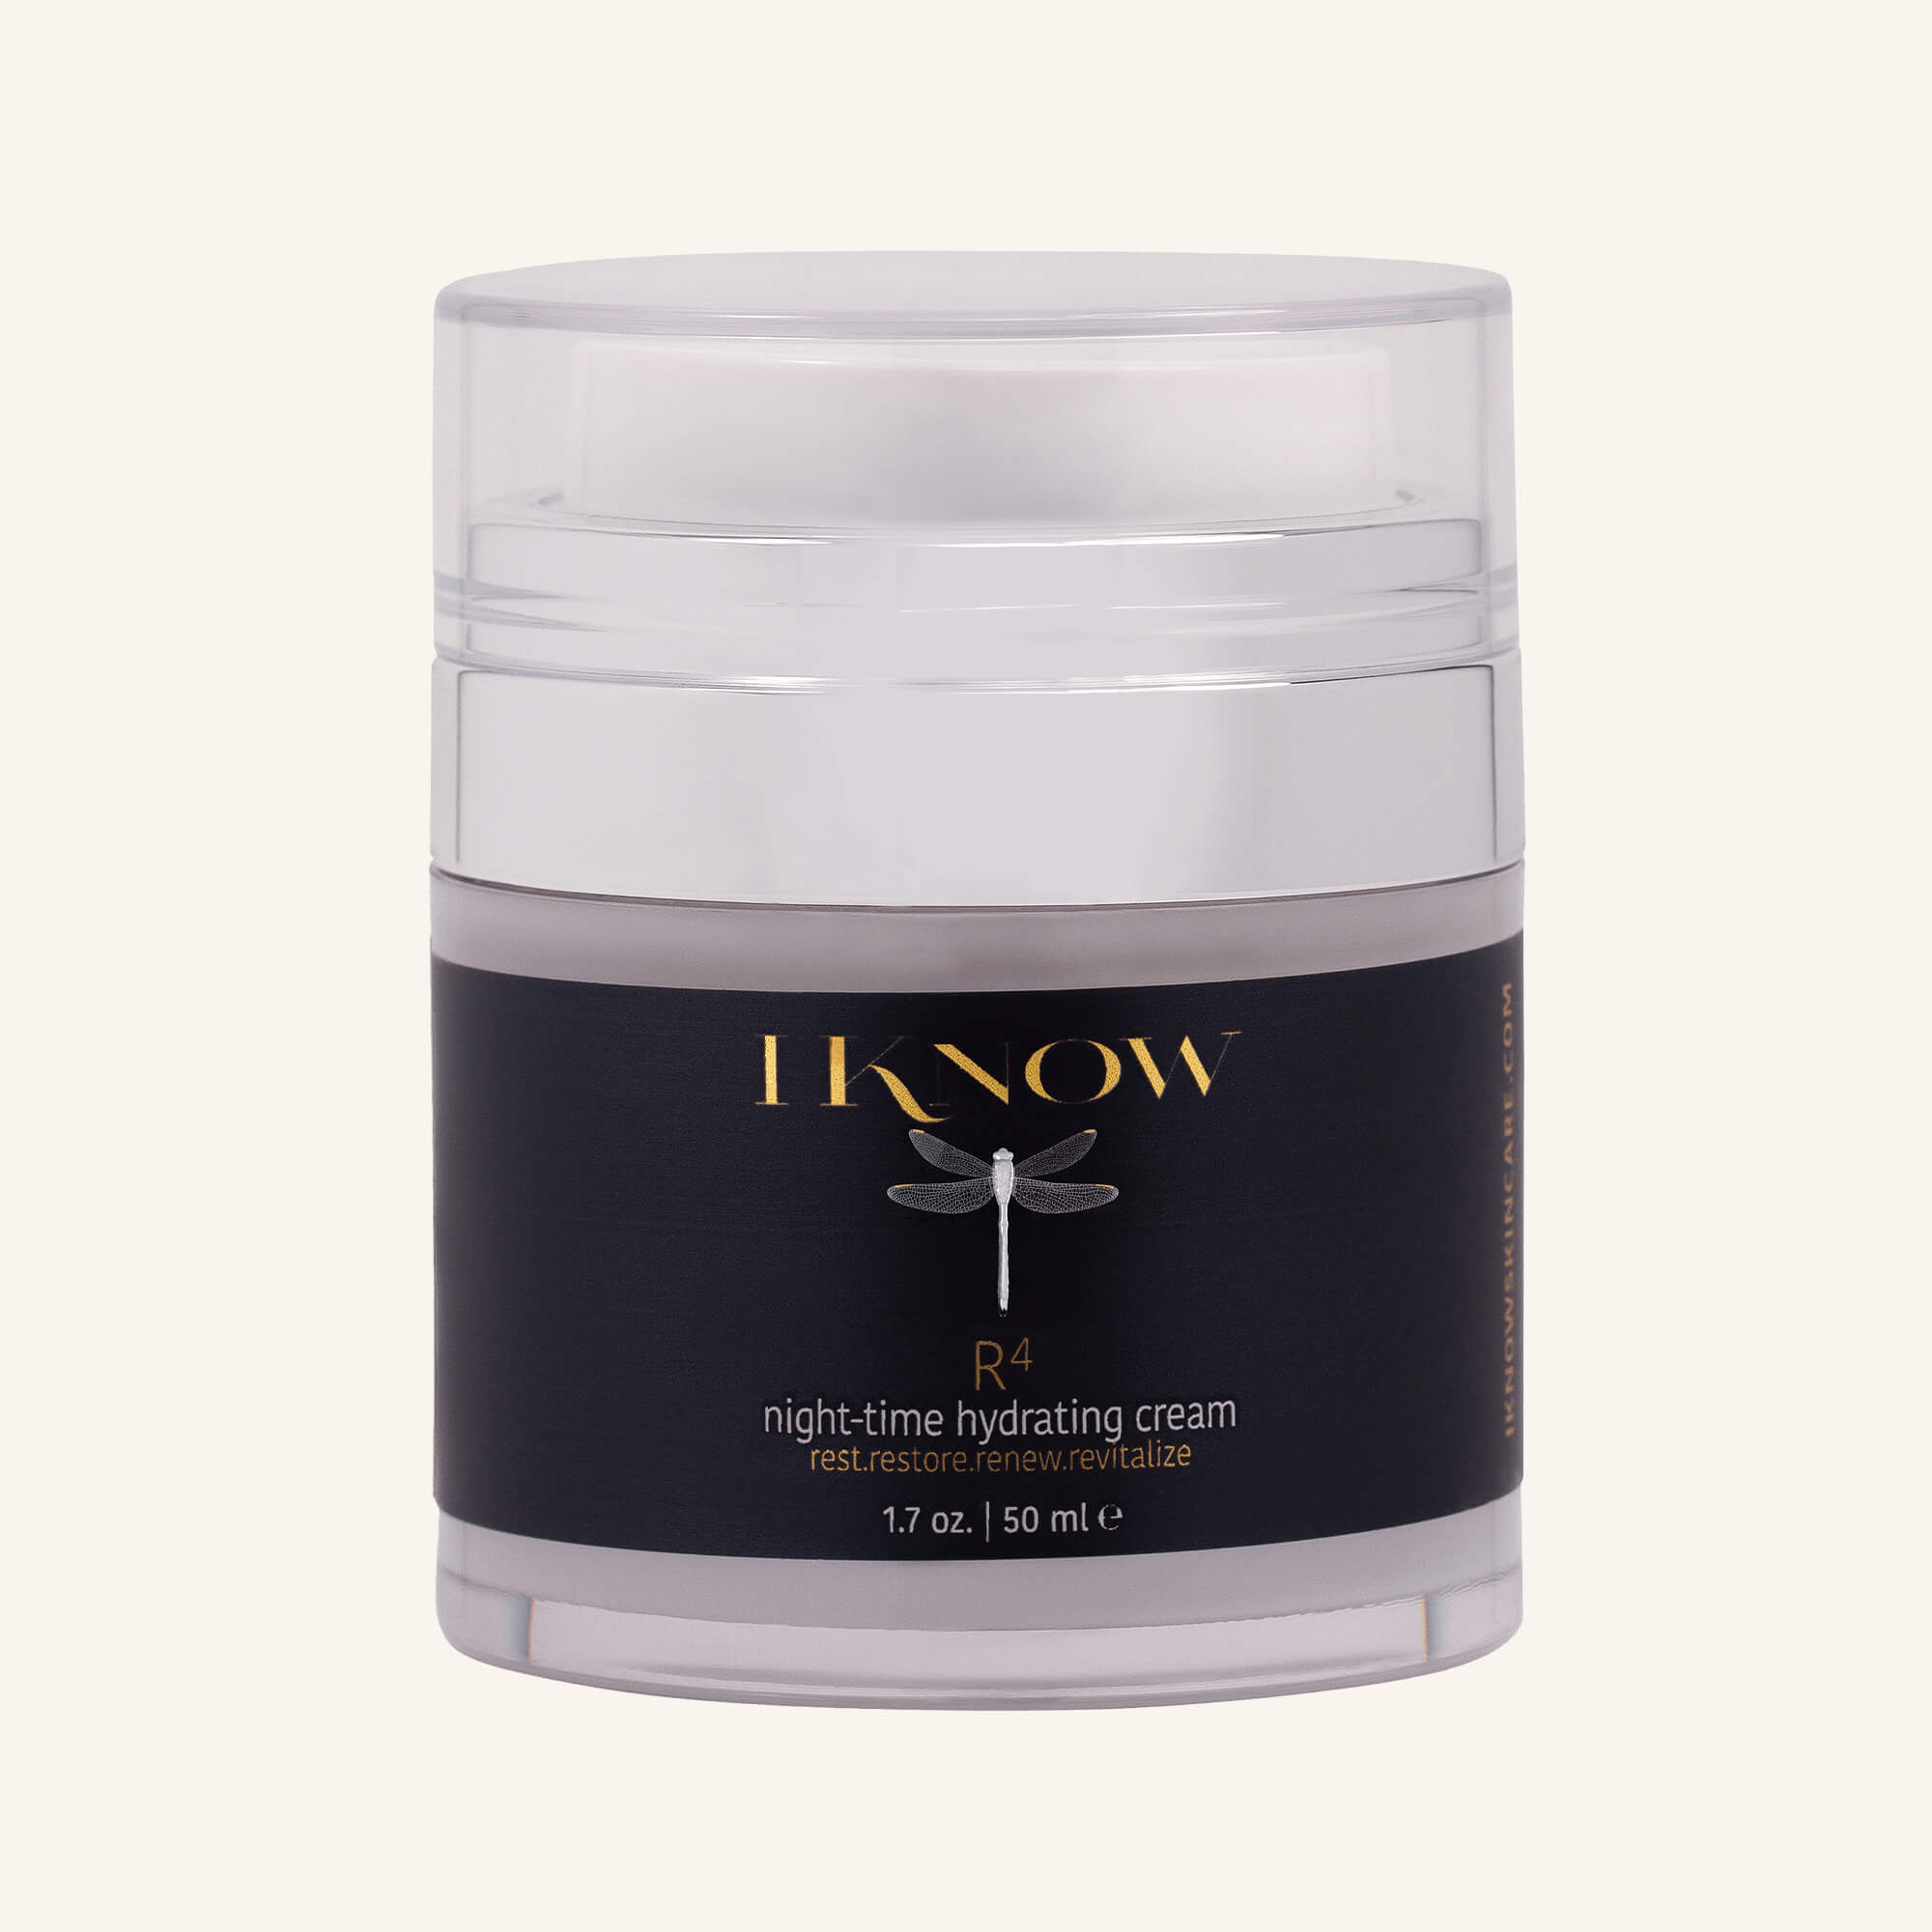 IKNOW R4 Night-time Hydrating Cream replenishes dry skin and boosts suppleness class=